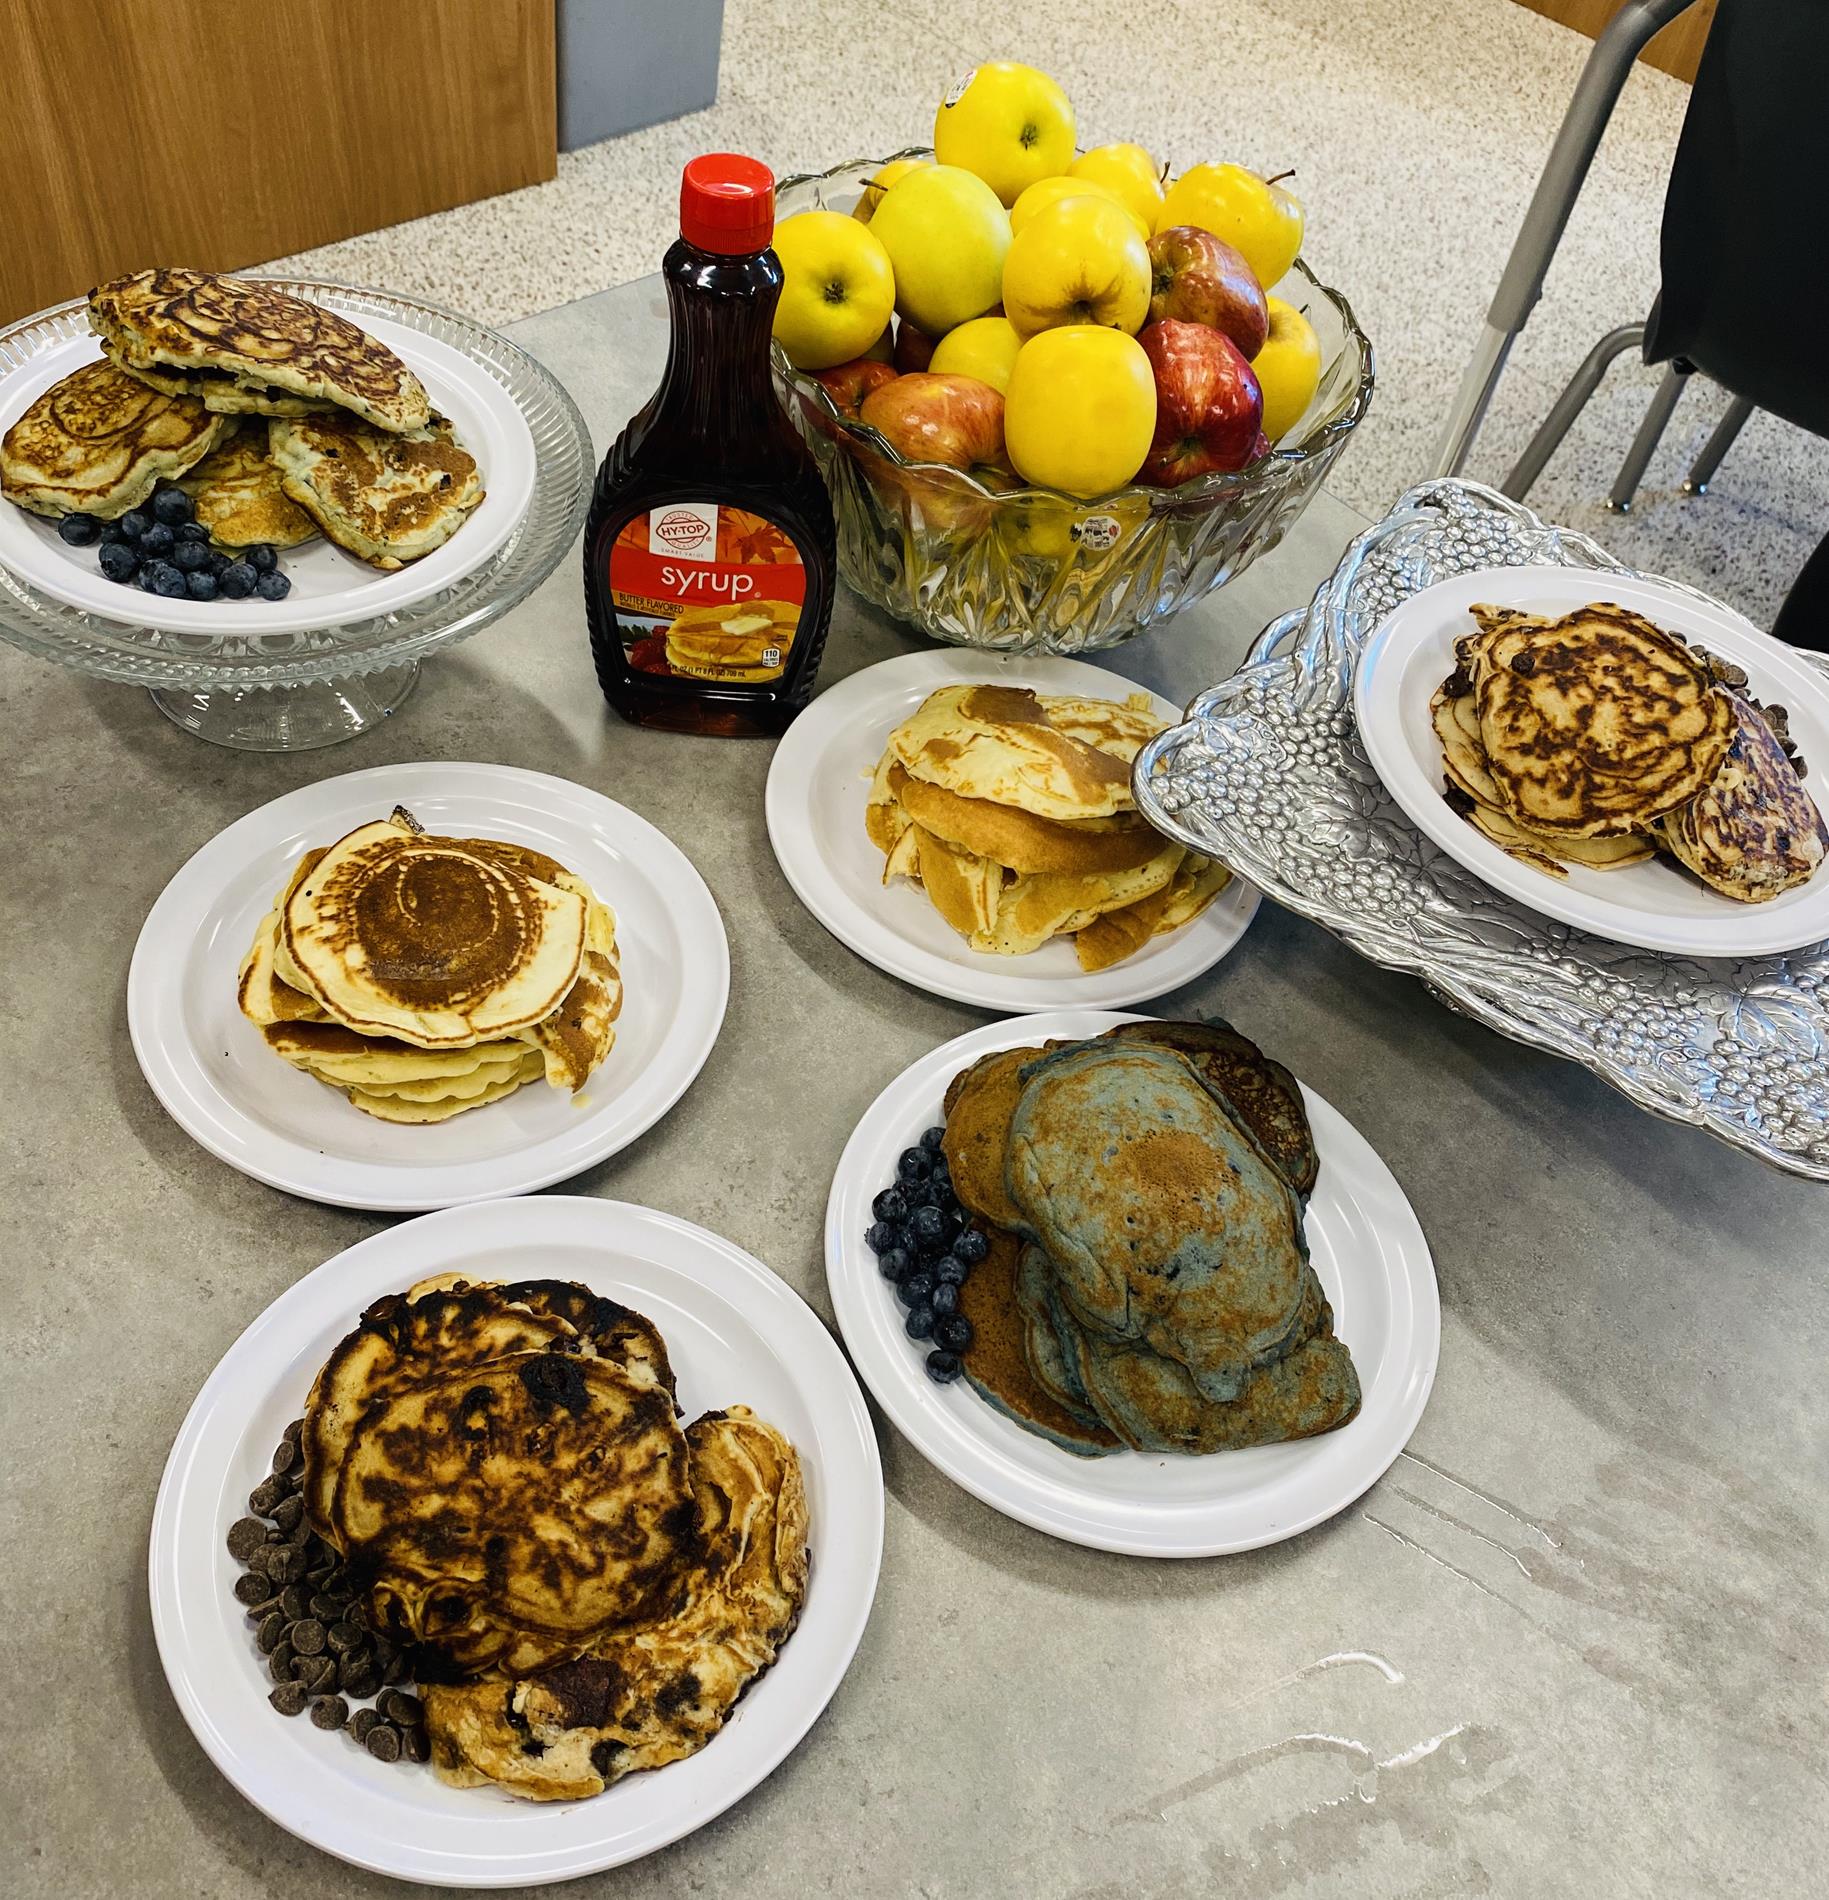 Food, Nutrition and Wellness: Chocolate-Chip, Blueberry, and Original Pancakes